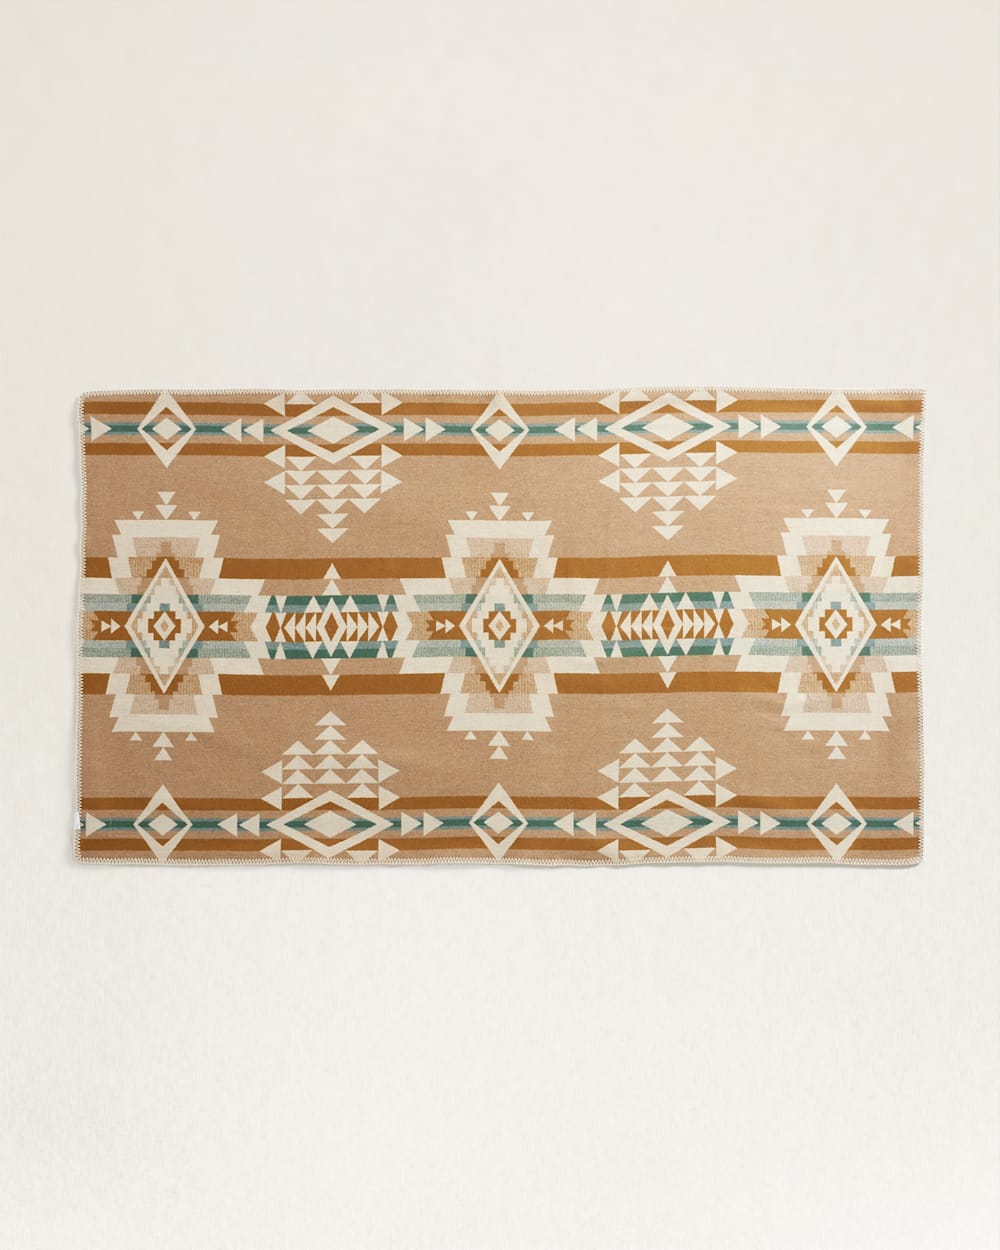 ALTERNATE VIEW OF ROCK POINT SADDLE BLANKET IN IVORY image number 5